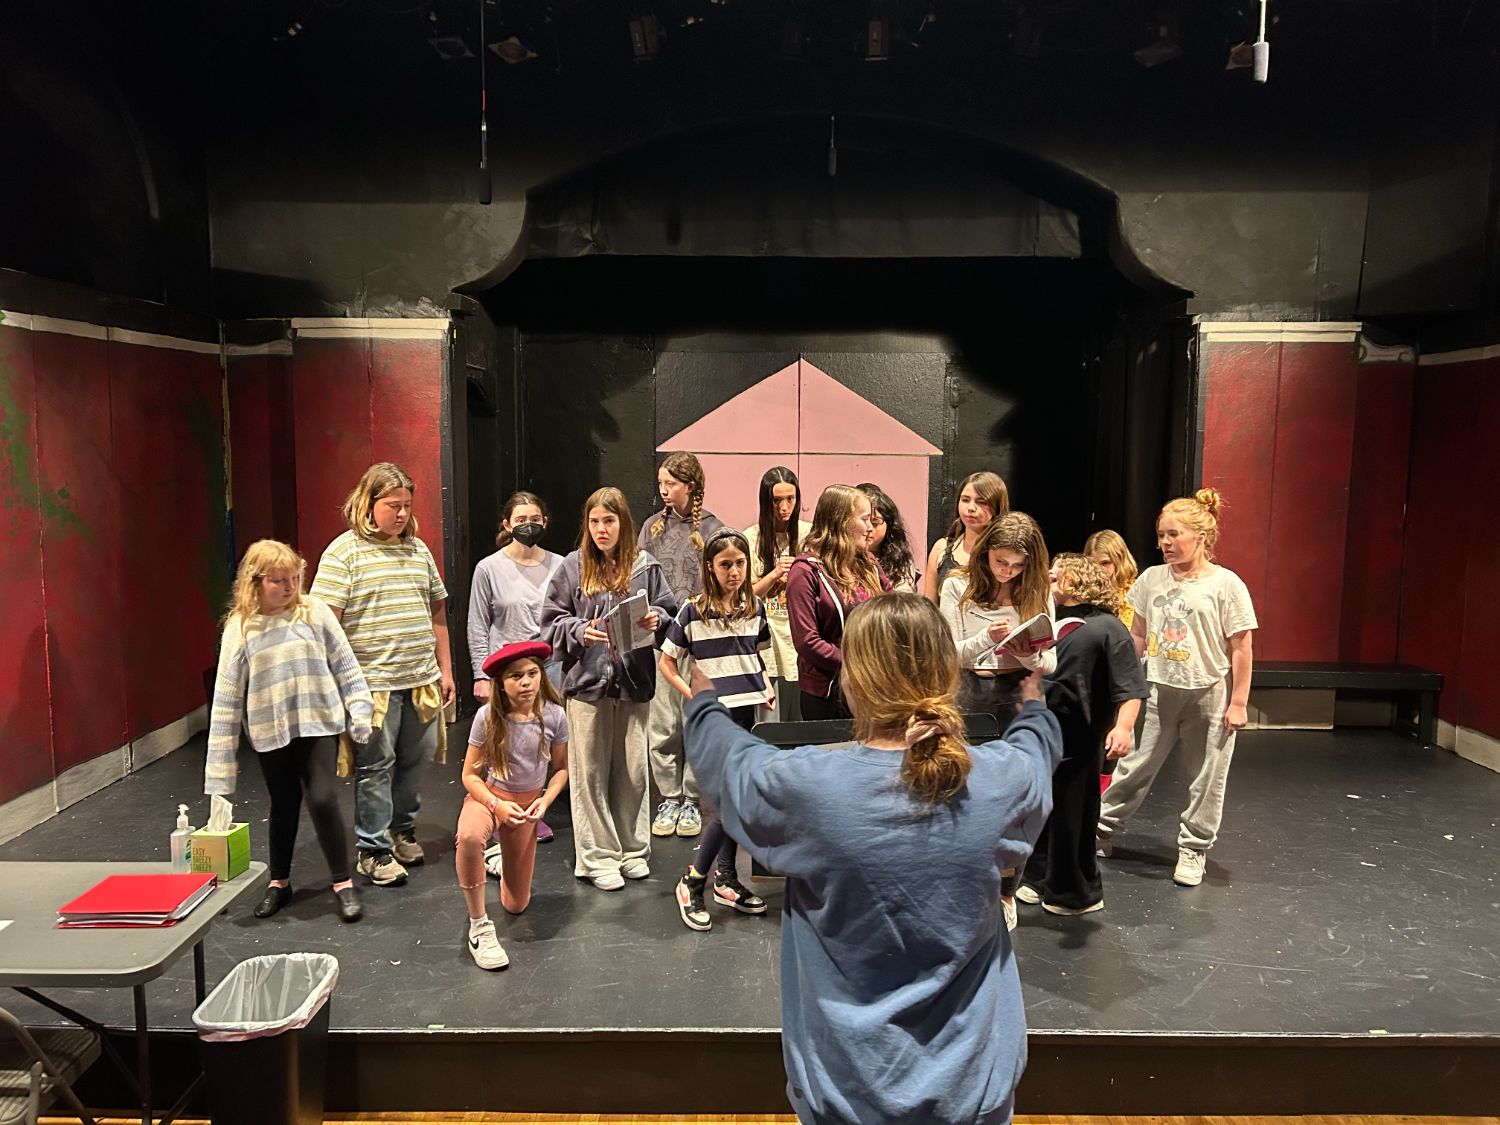 PHOTO: provided by YST | The South Pasadenan | The cast of Mean Girls Jr. rehearsing on stage at Fremont Centre Theatre.